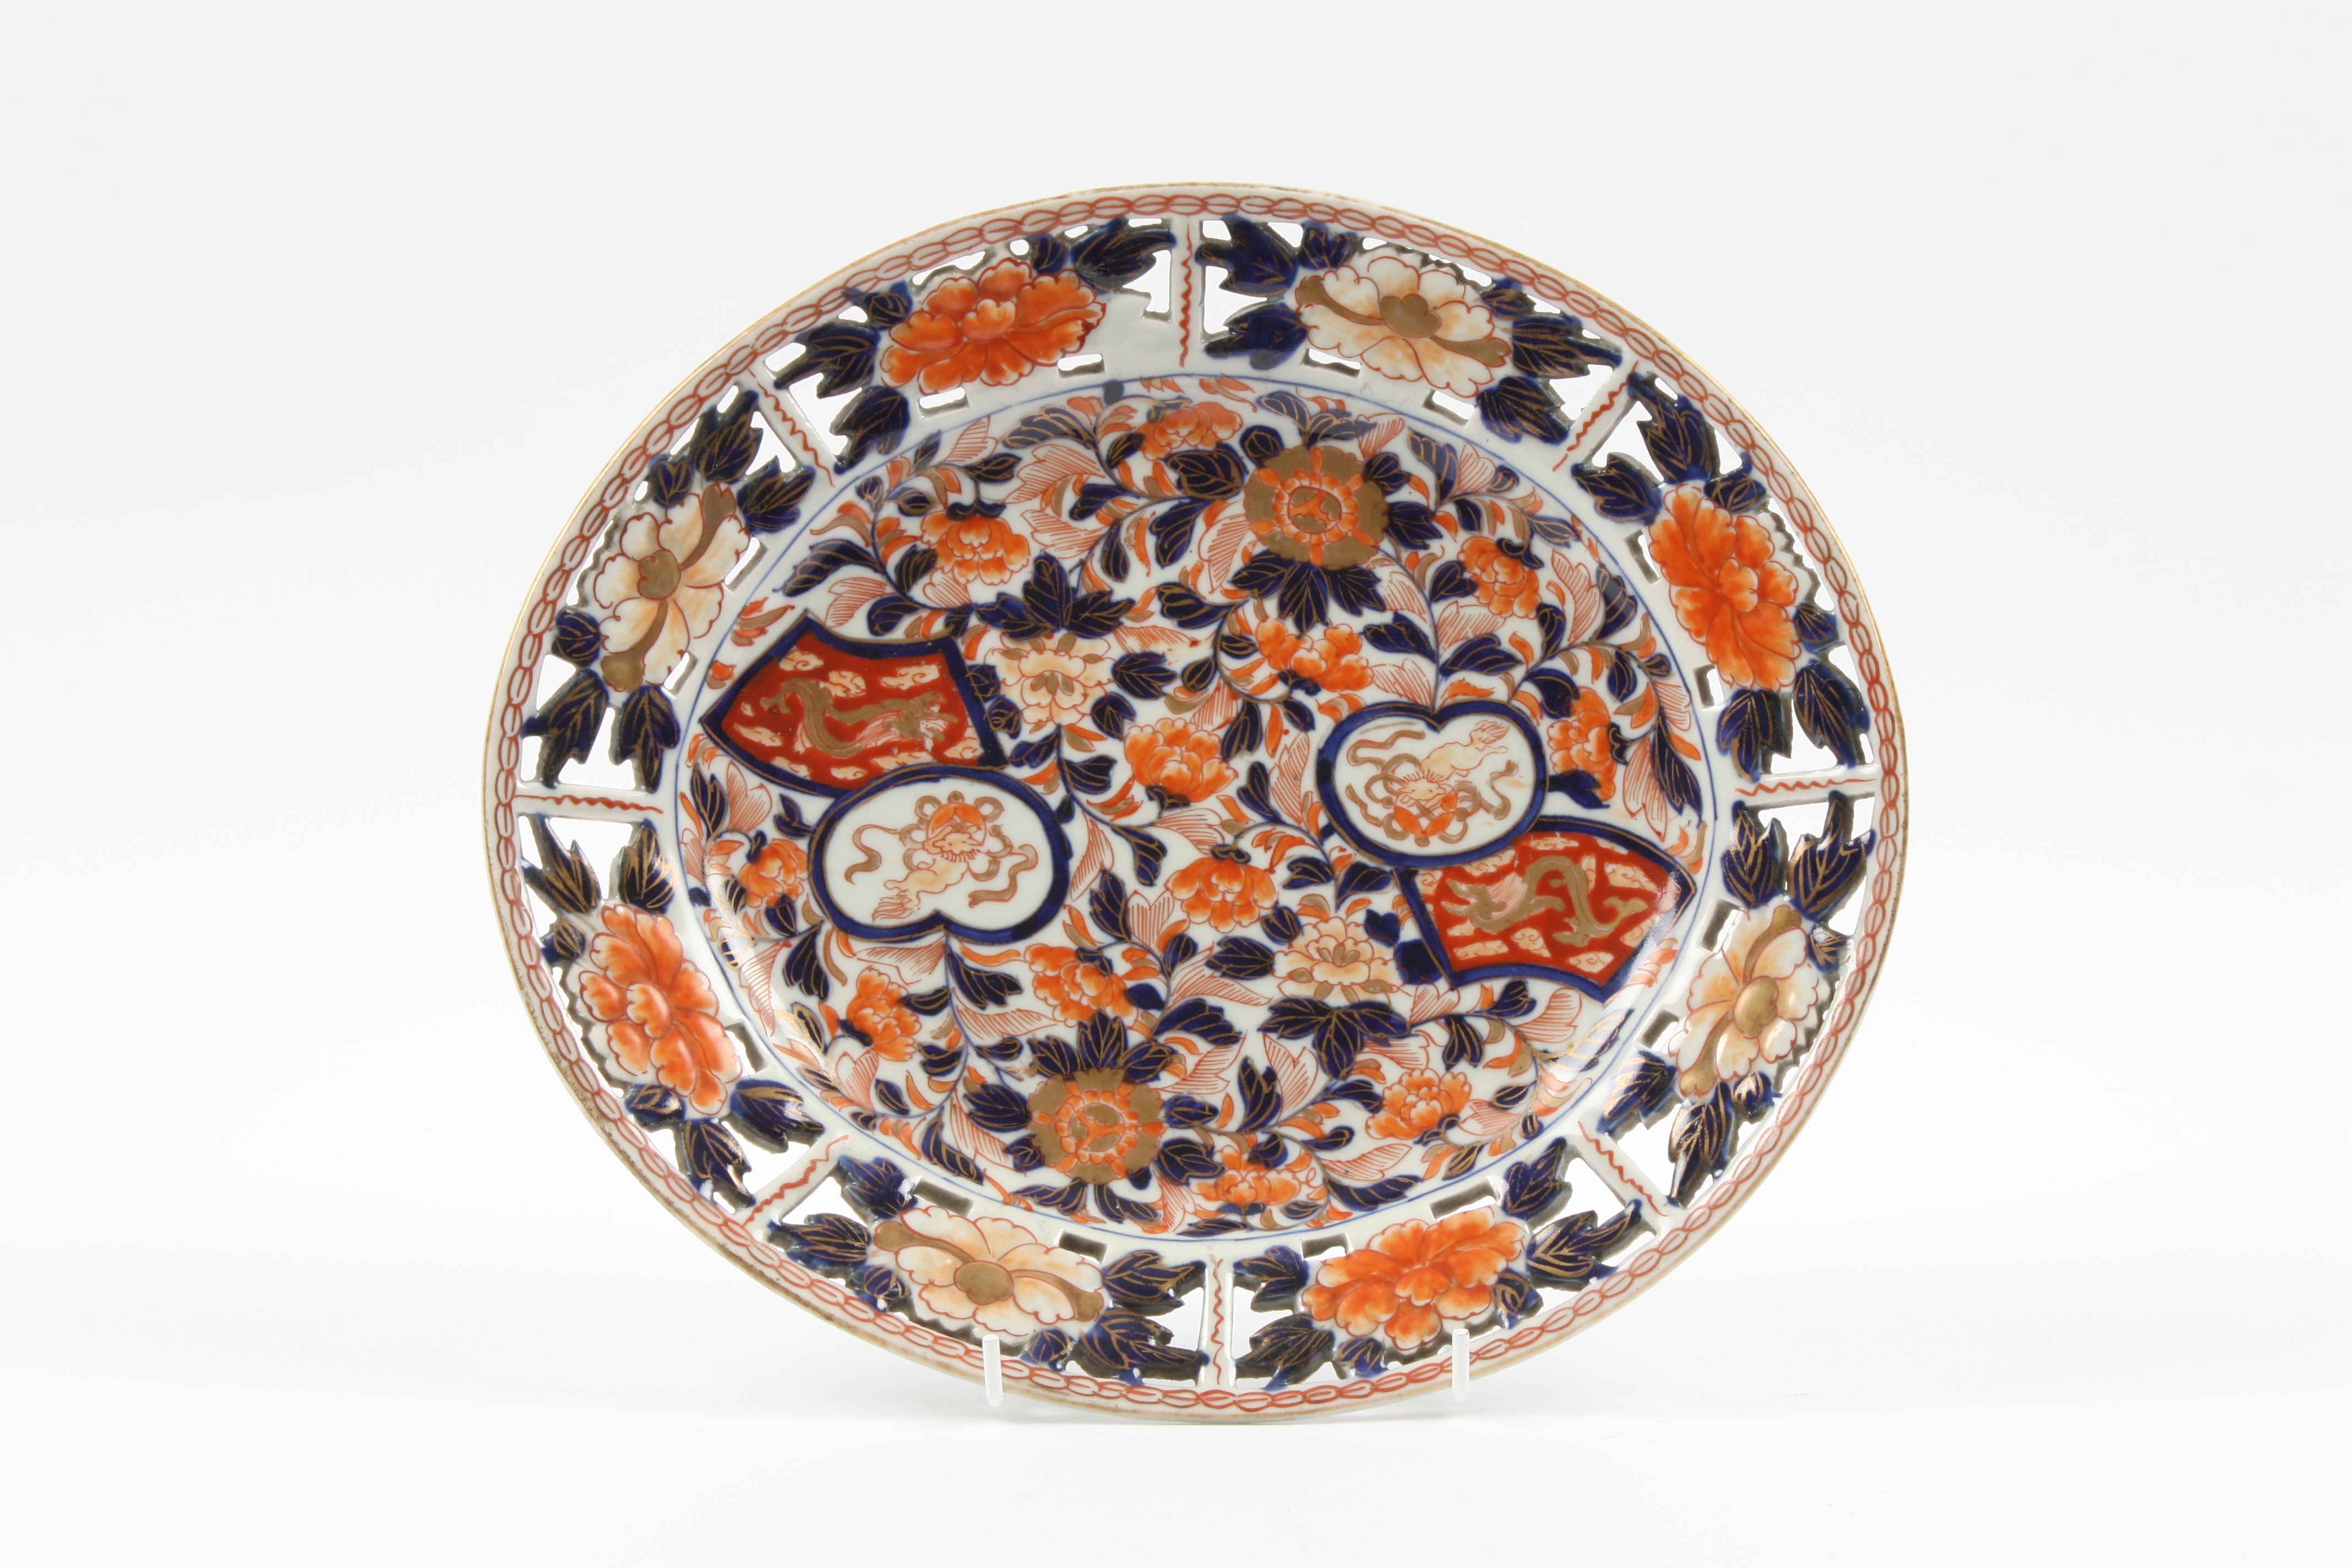 A 19th century Japanese Imari oval platter with pierced rim, decorated with smalls panels of animals